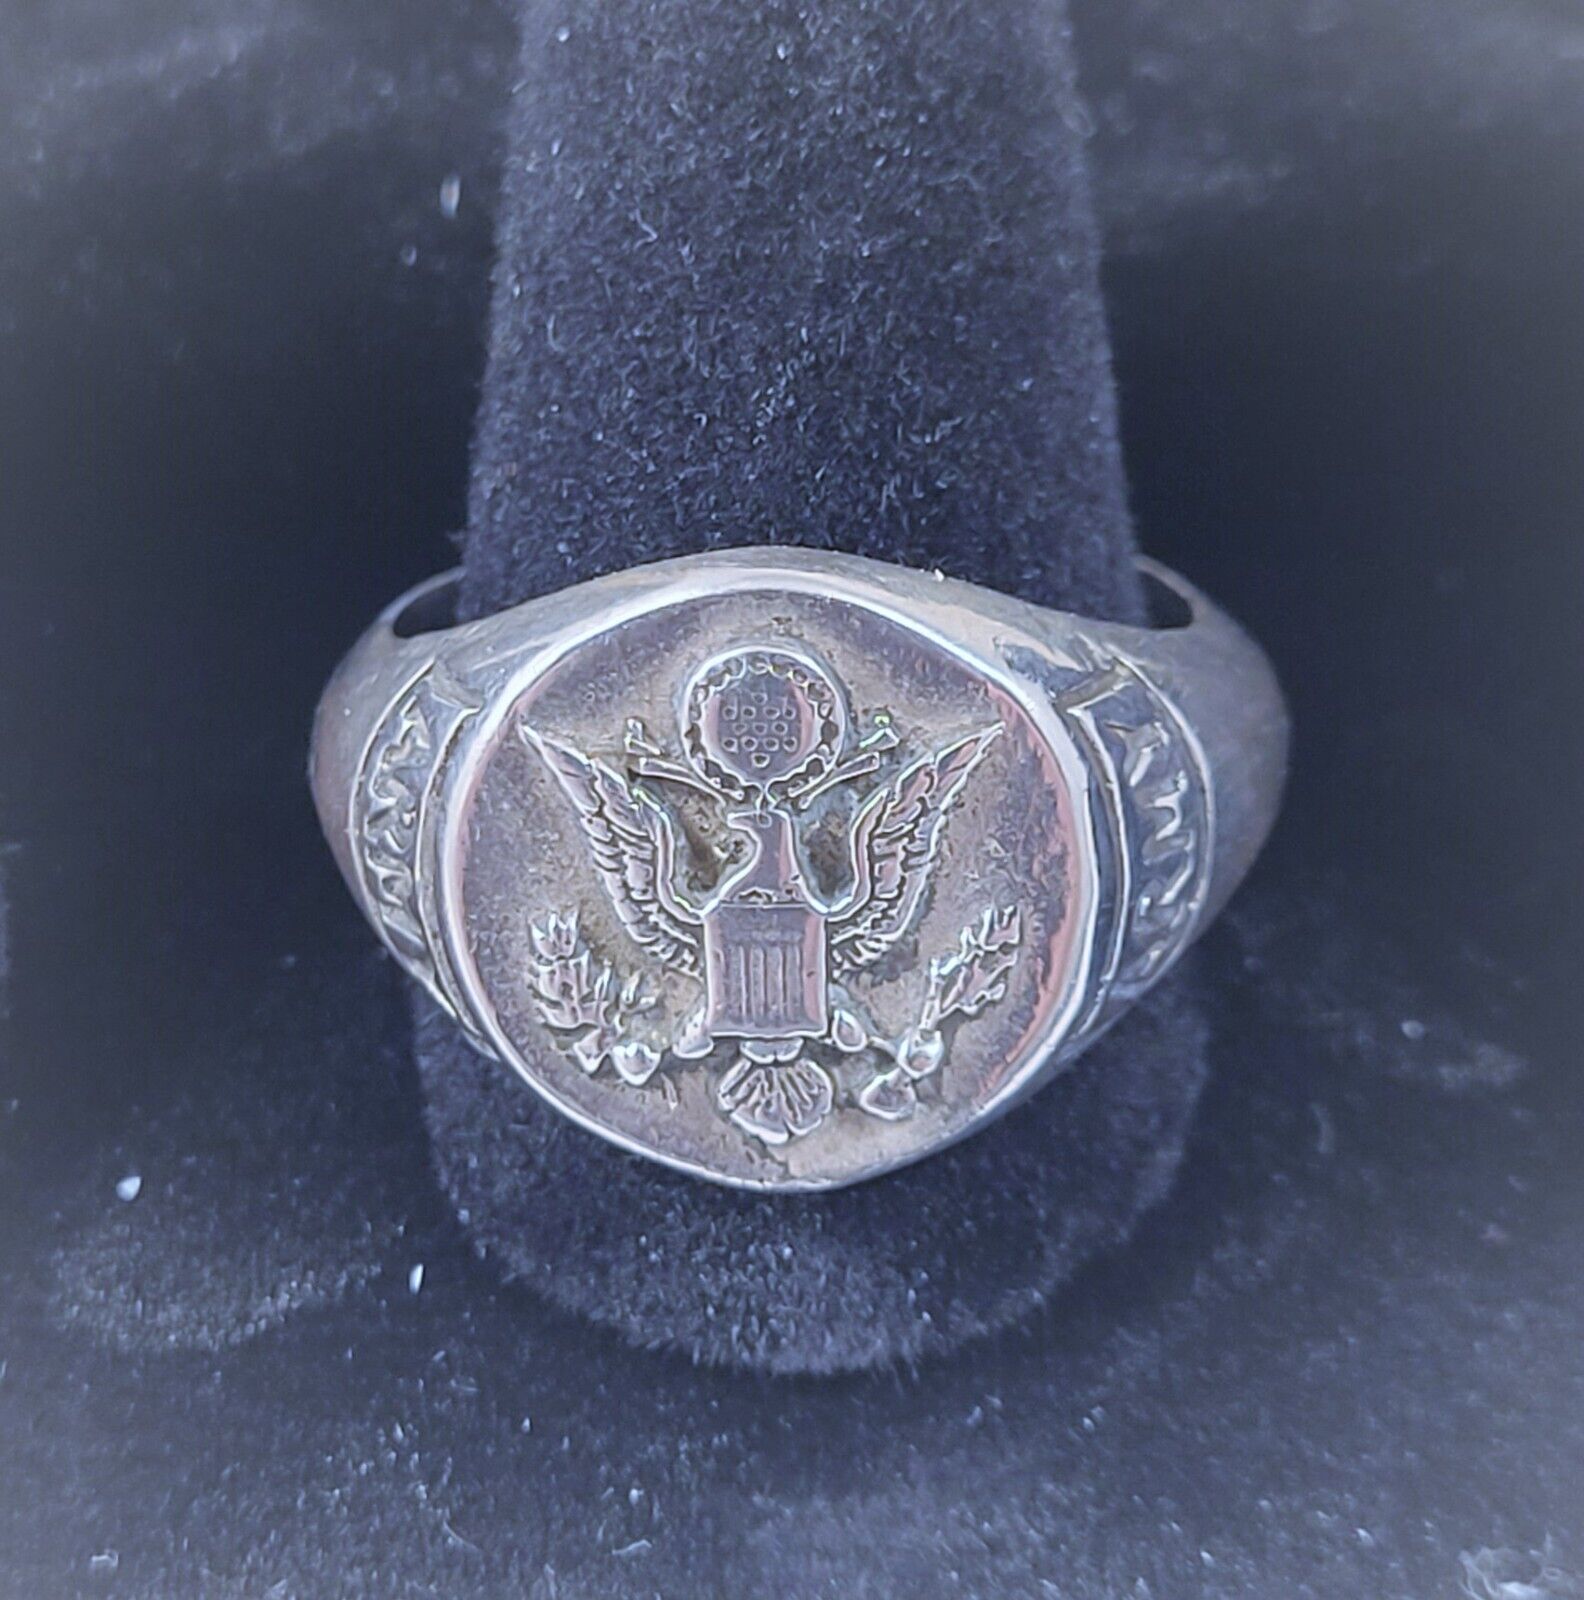 VINTAGE US ARMY SILVER RING-UNITED STATES ARMY-SIGNET STYLE-SZ 11-FREE  SHIPPING